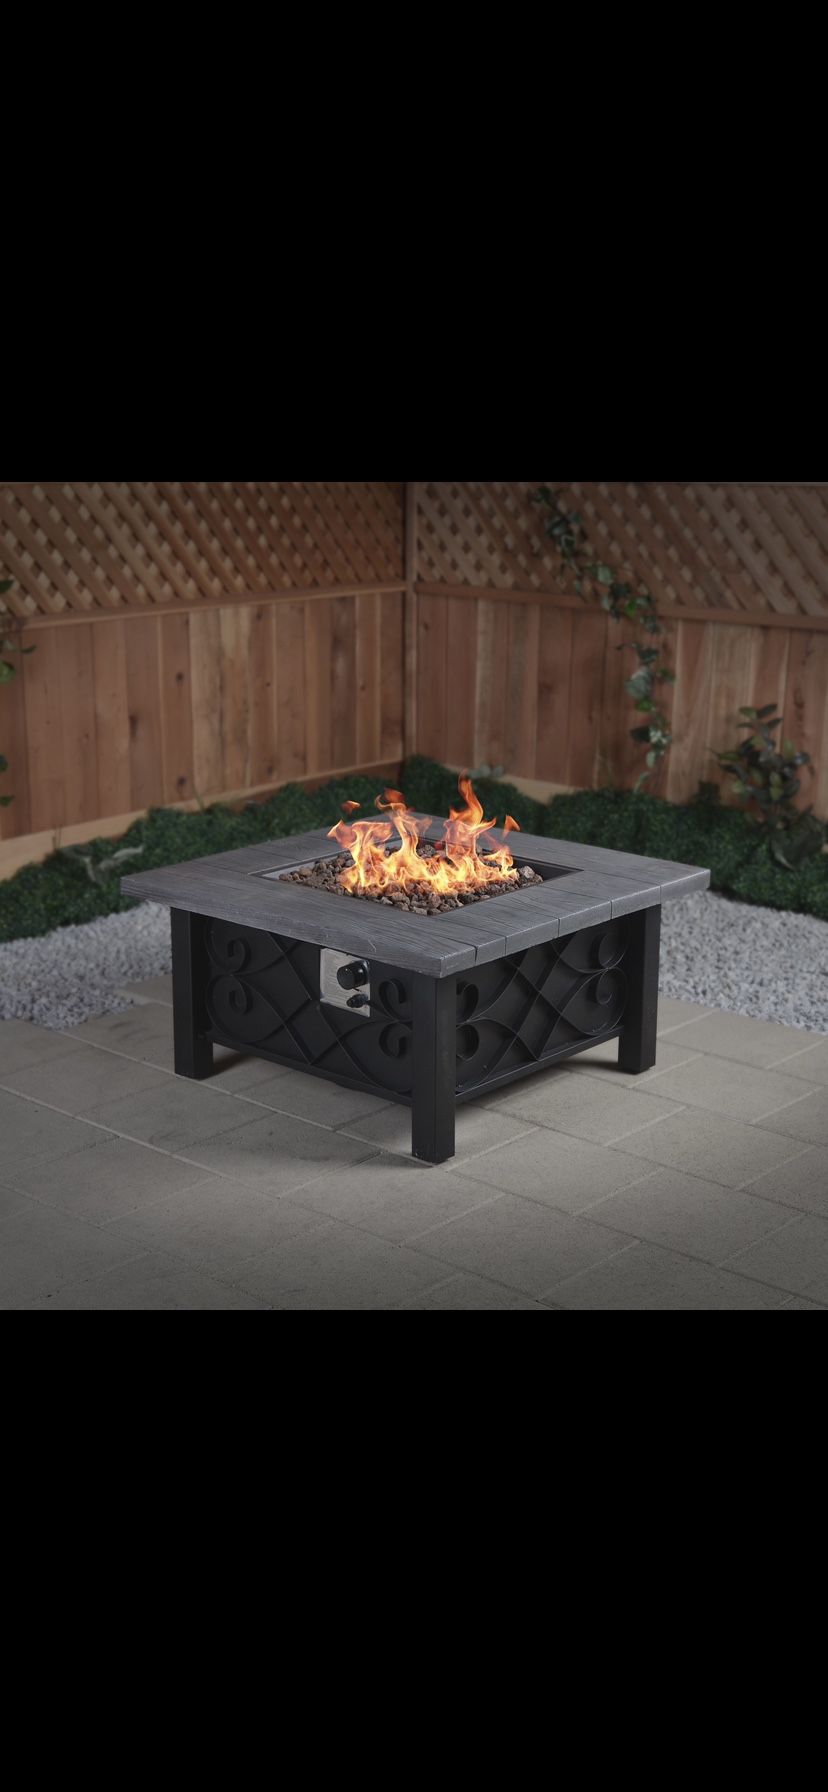 Marbella Stainless Steel Fire Pit (Completely New)